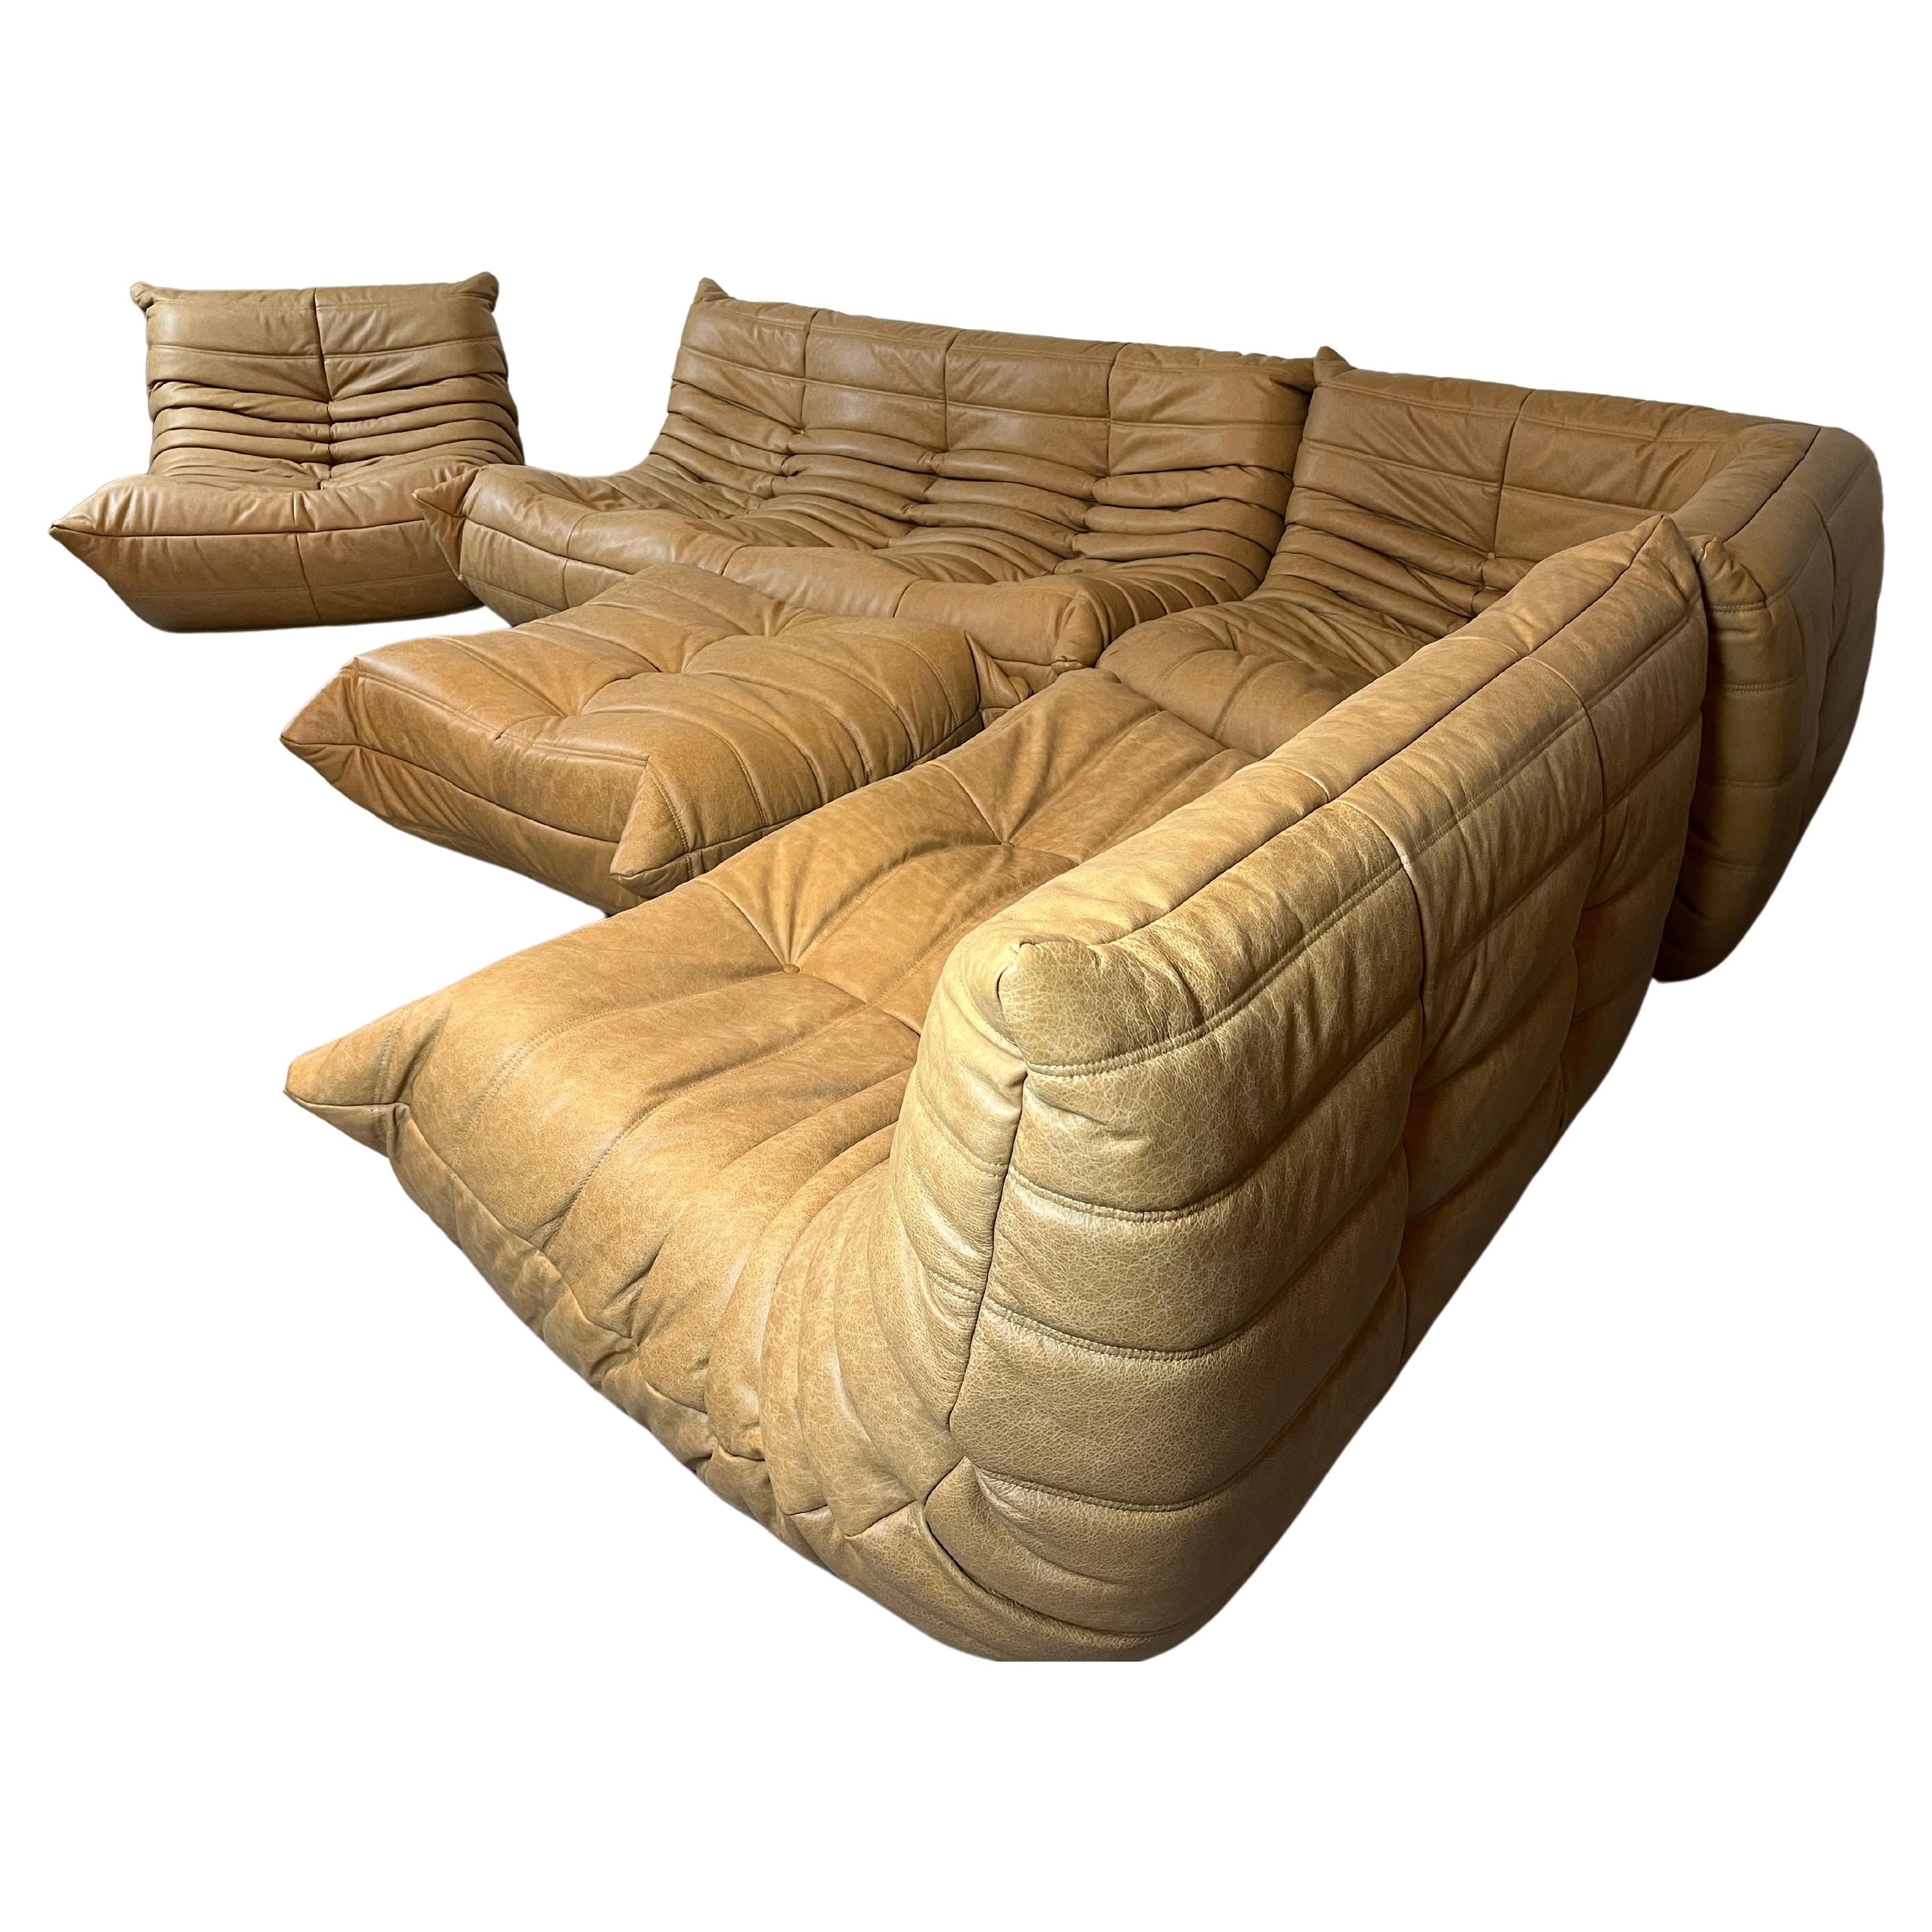 Camel leather Togo Sofa by Michel Ducaroy for Ligne Roset, Set of 5 pieces For Sale